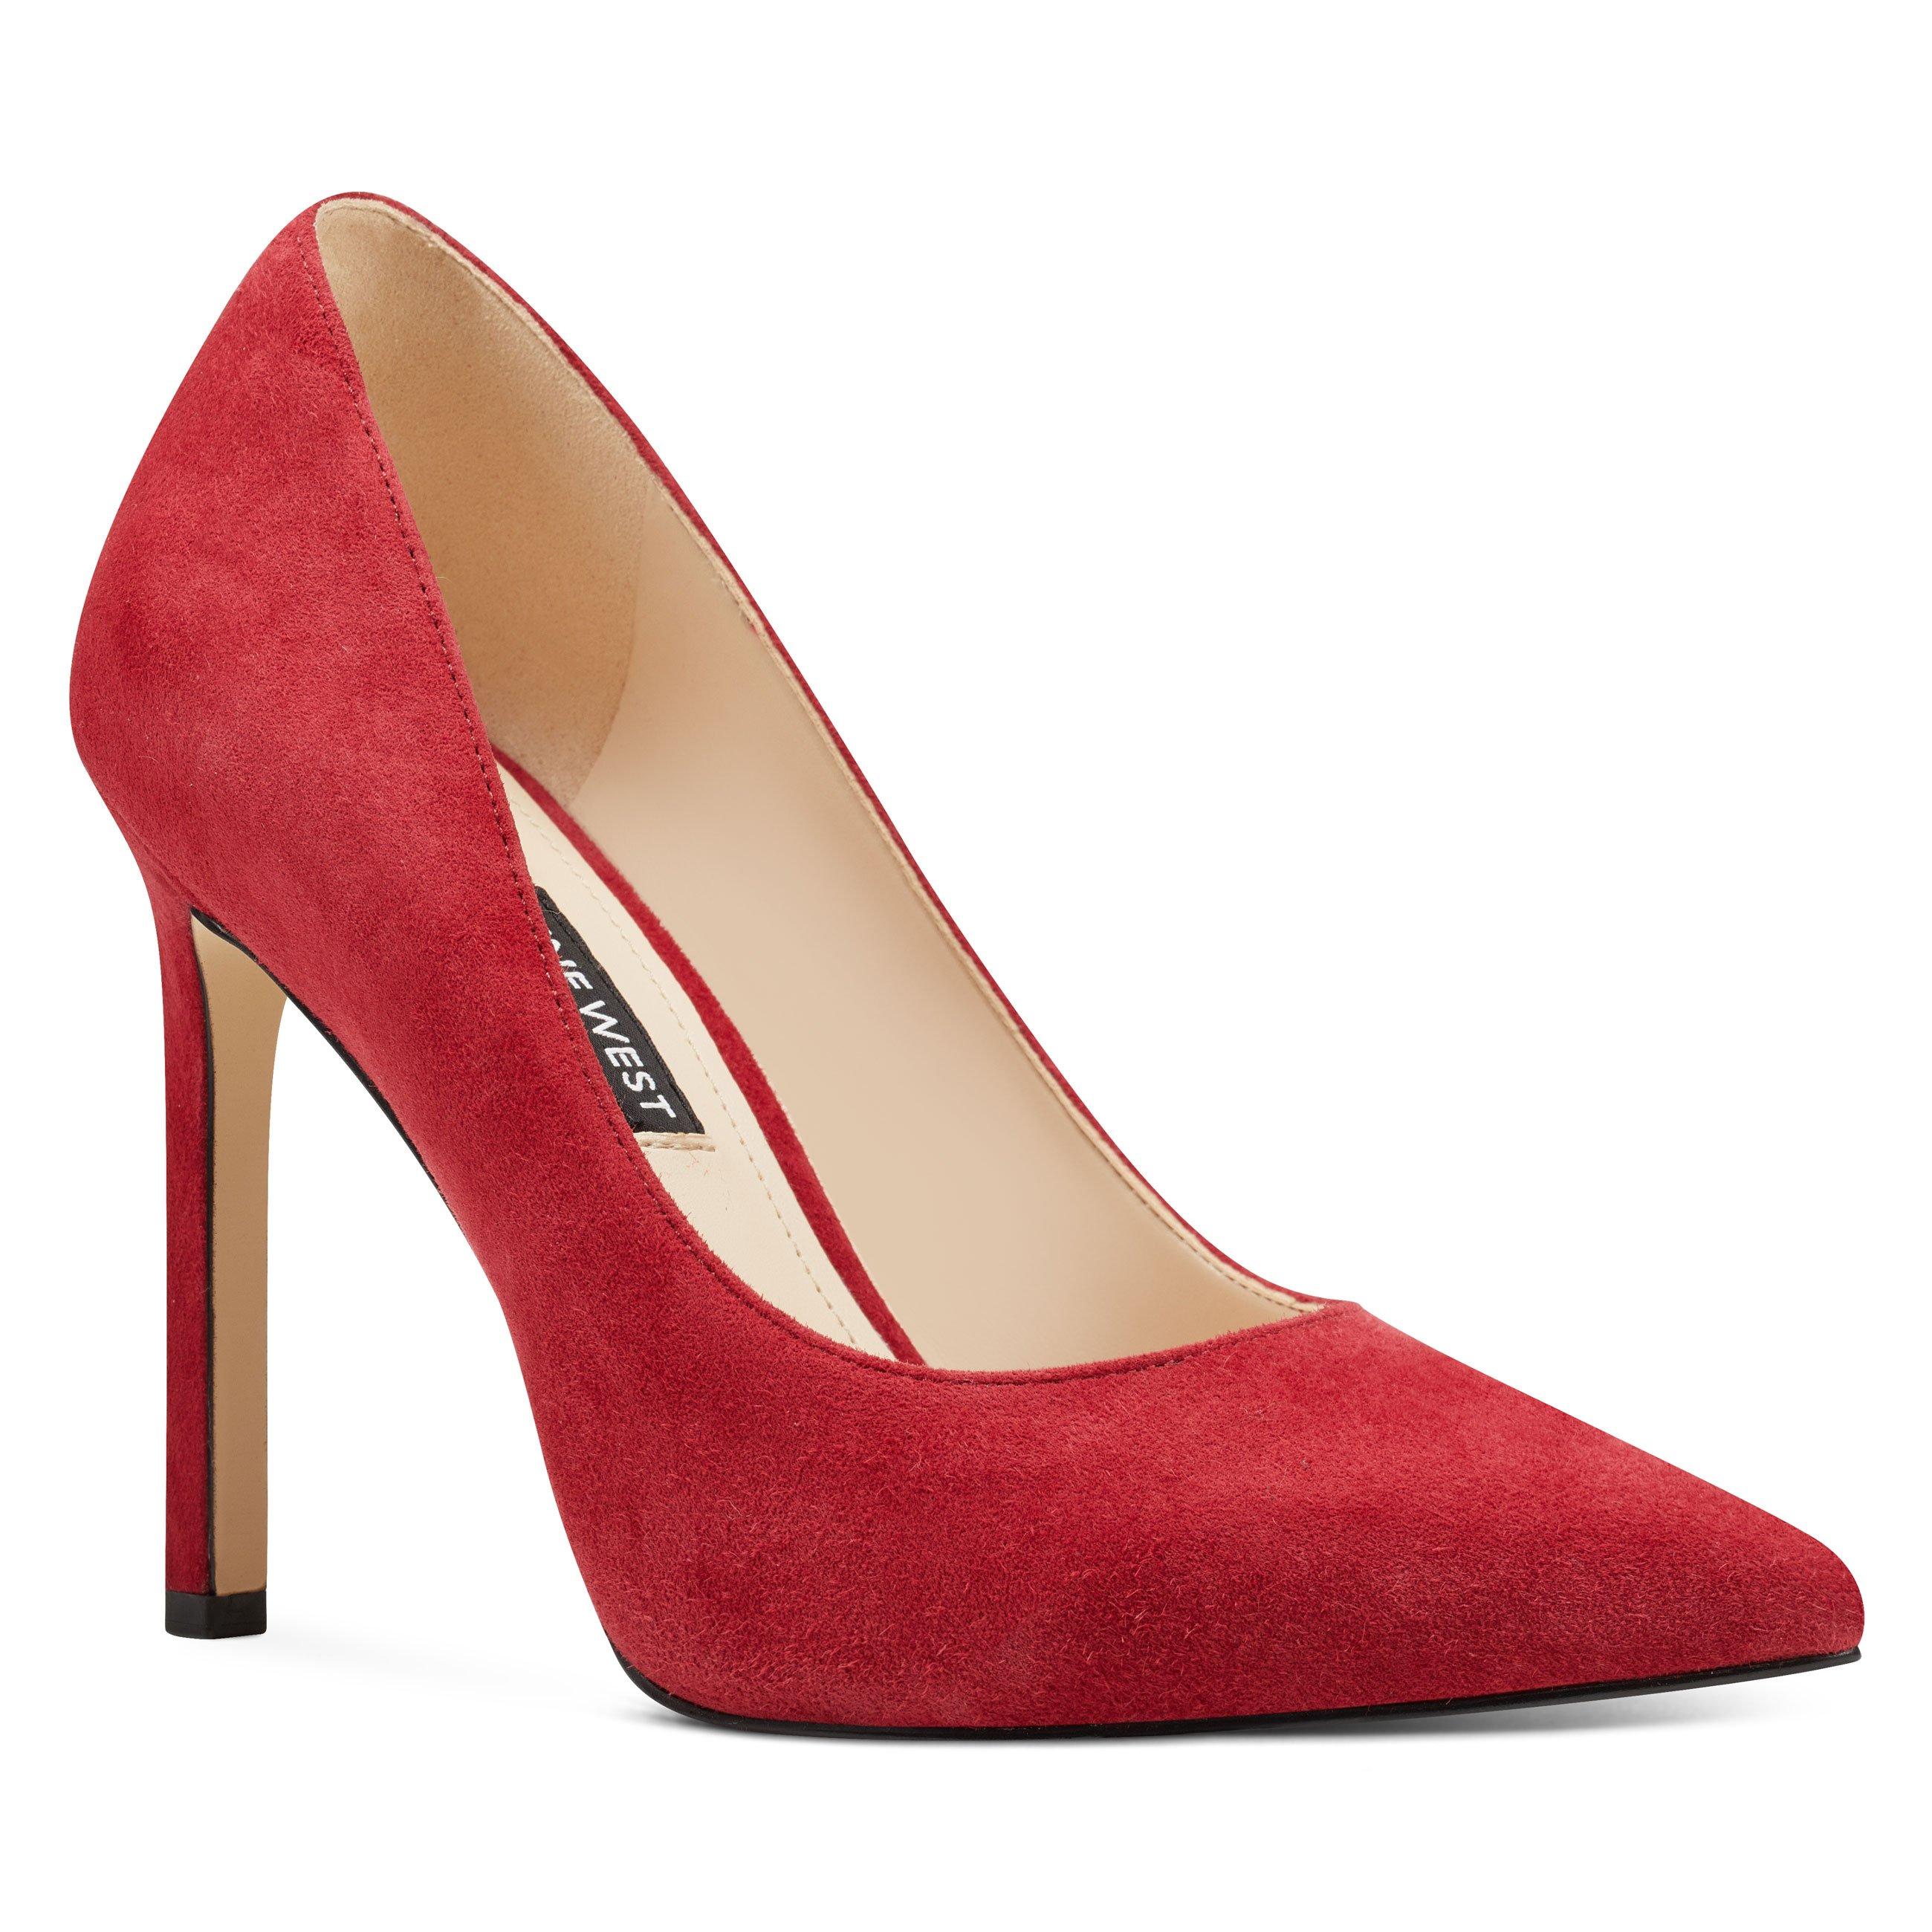 Nine West Silk Tatiana Pointy Toe Pumps in Red Suede (Red) - Lyst